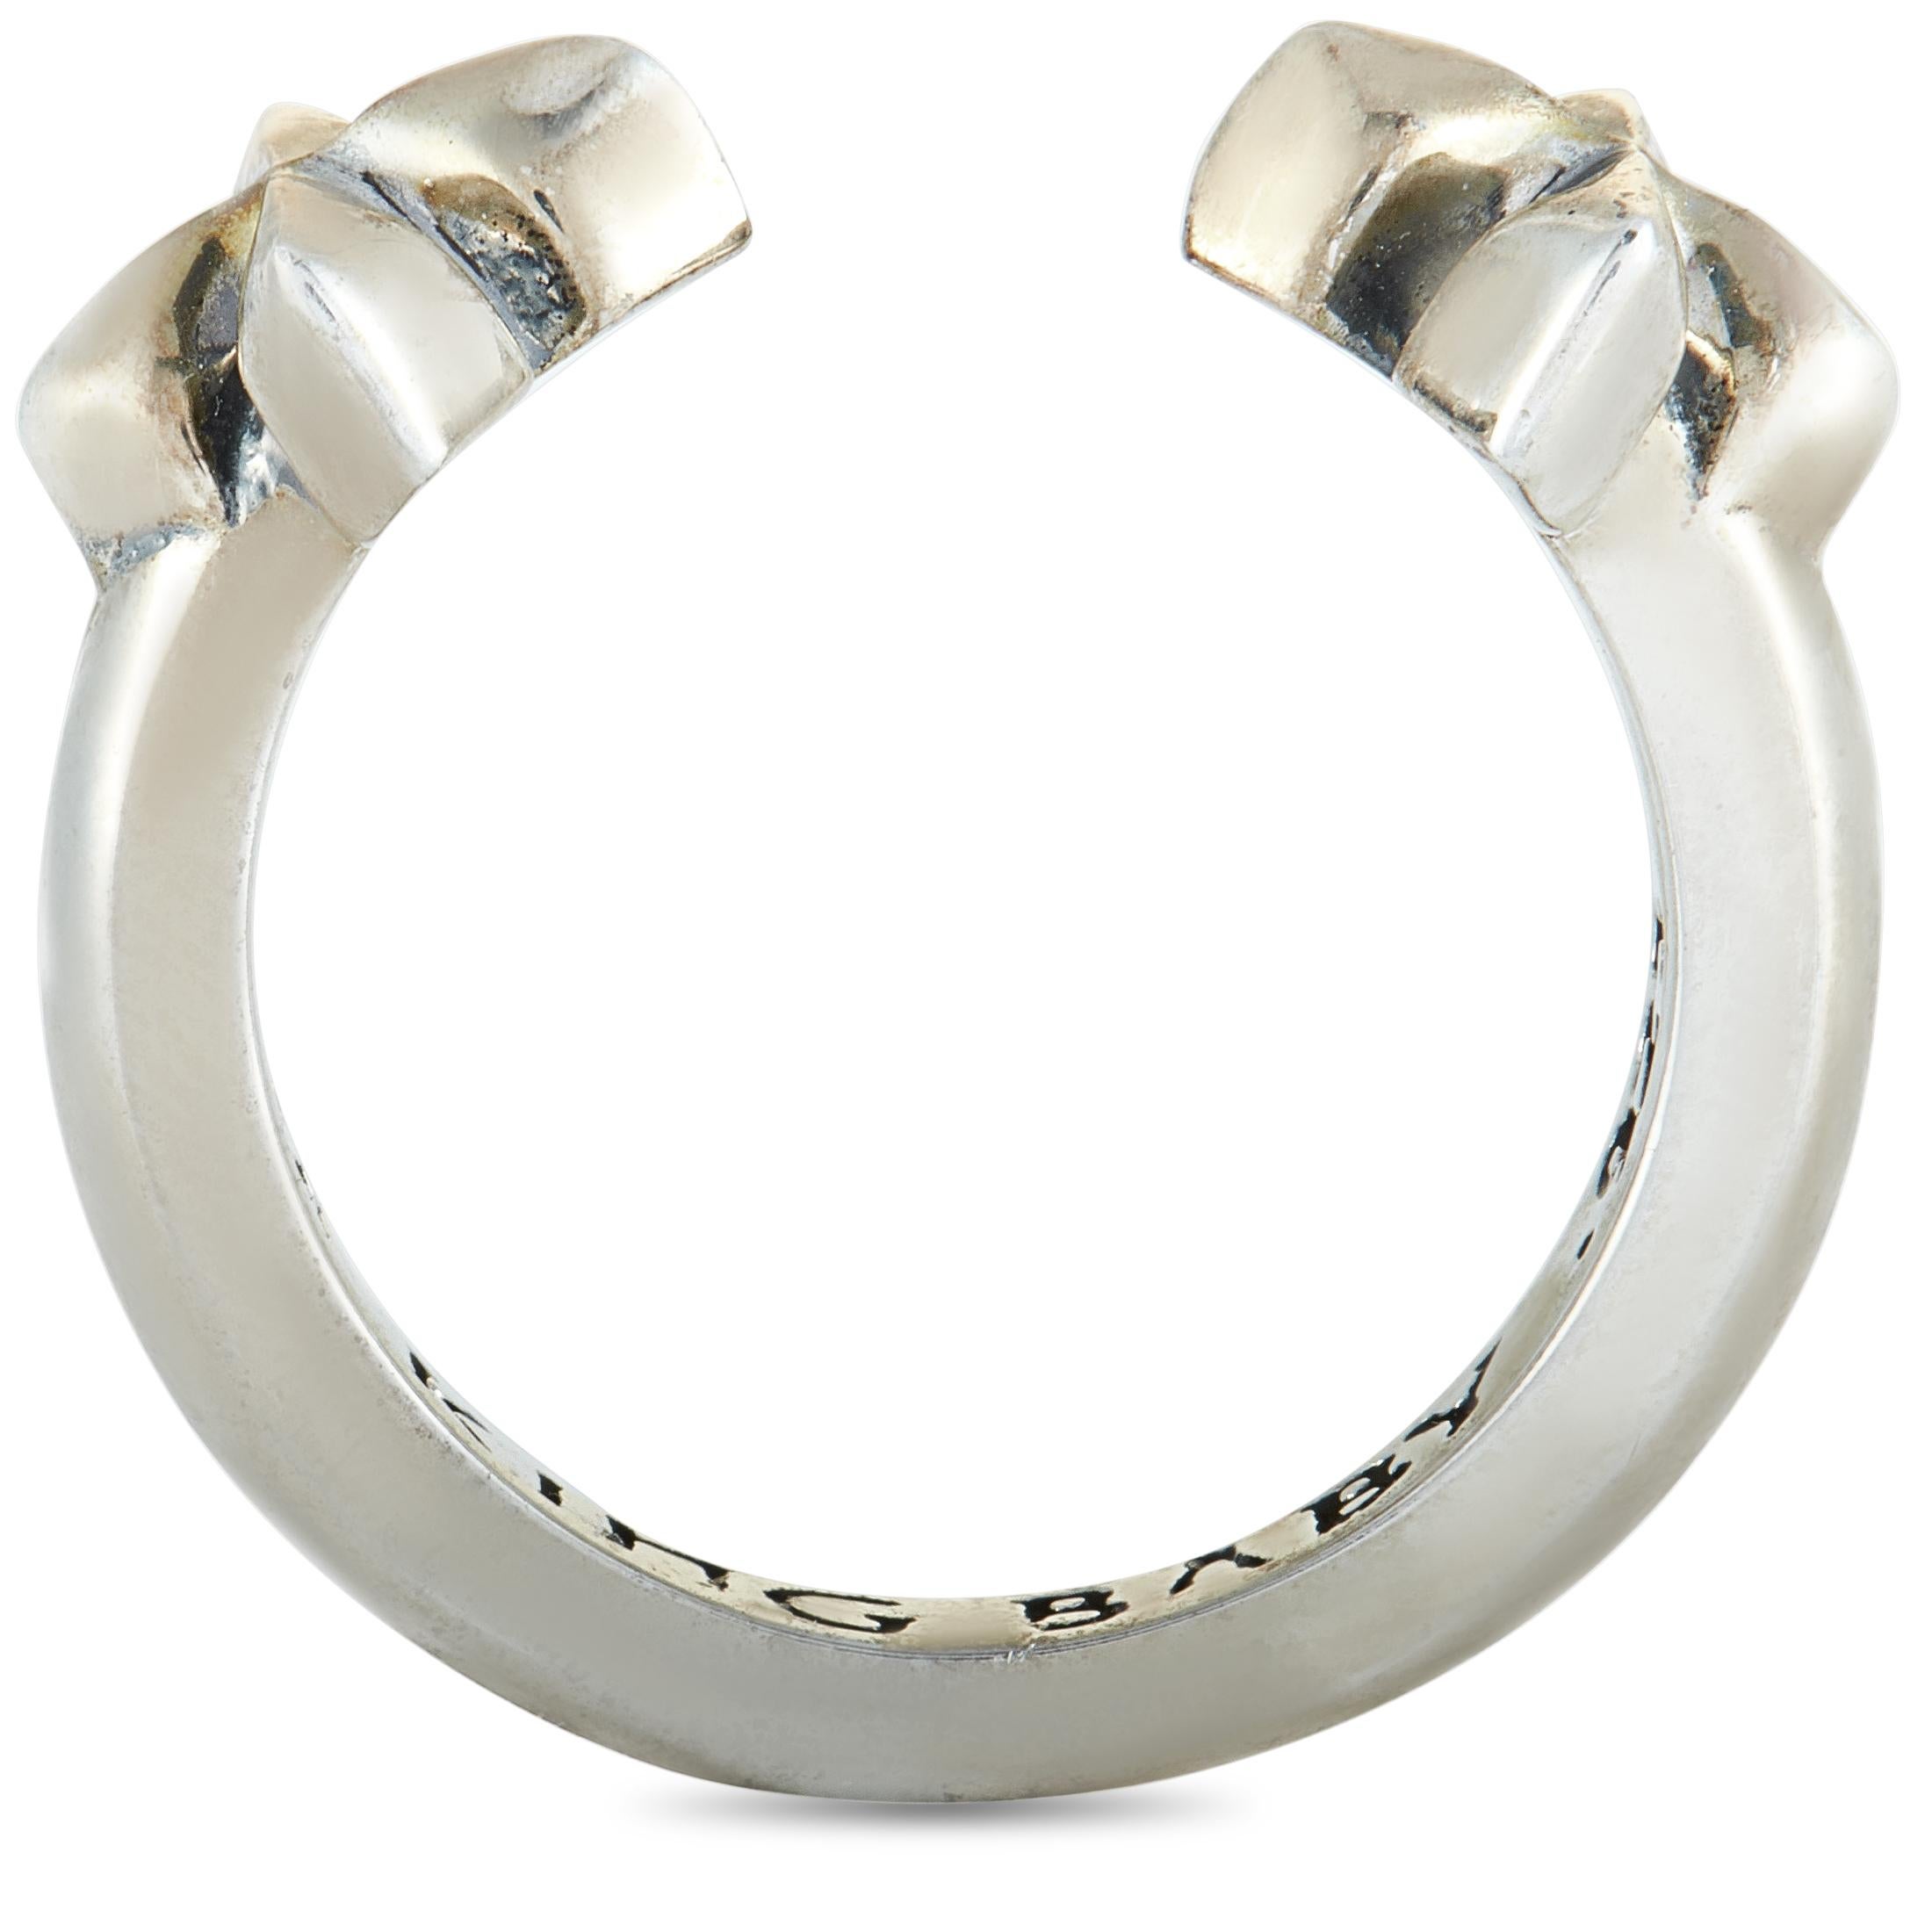 This King Baby open ring is crafted from sterling silver and weighs 4.9 grams. The ring boasts band thickness of 3 mm and top height of 4 mm, while top dimensions measure 22 by 8 mm.

Offered in brand new condition, this item includes the